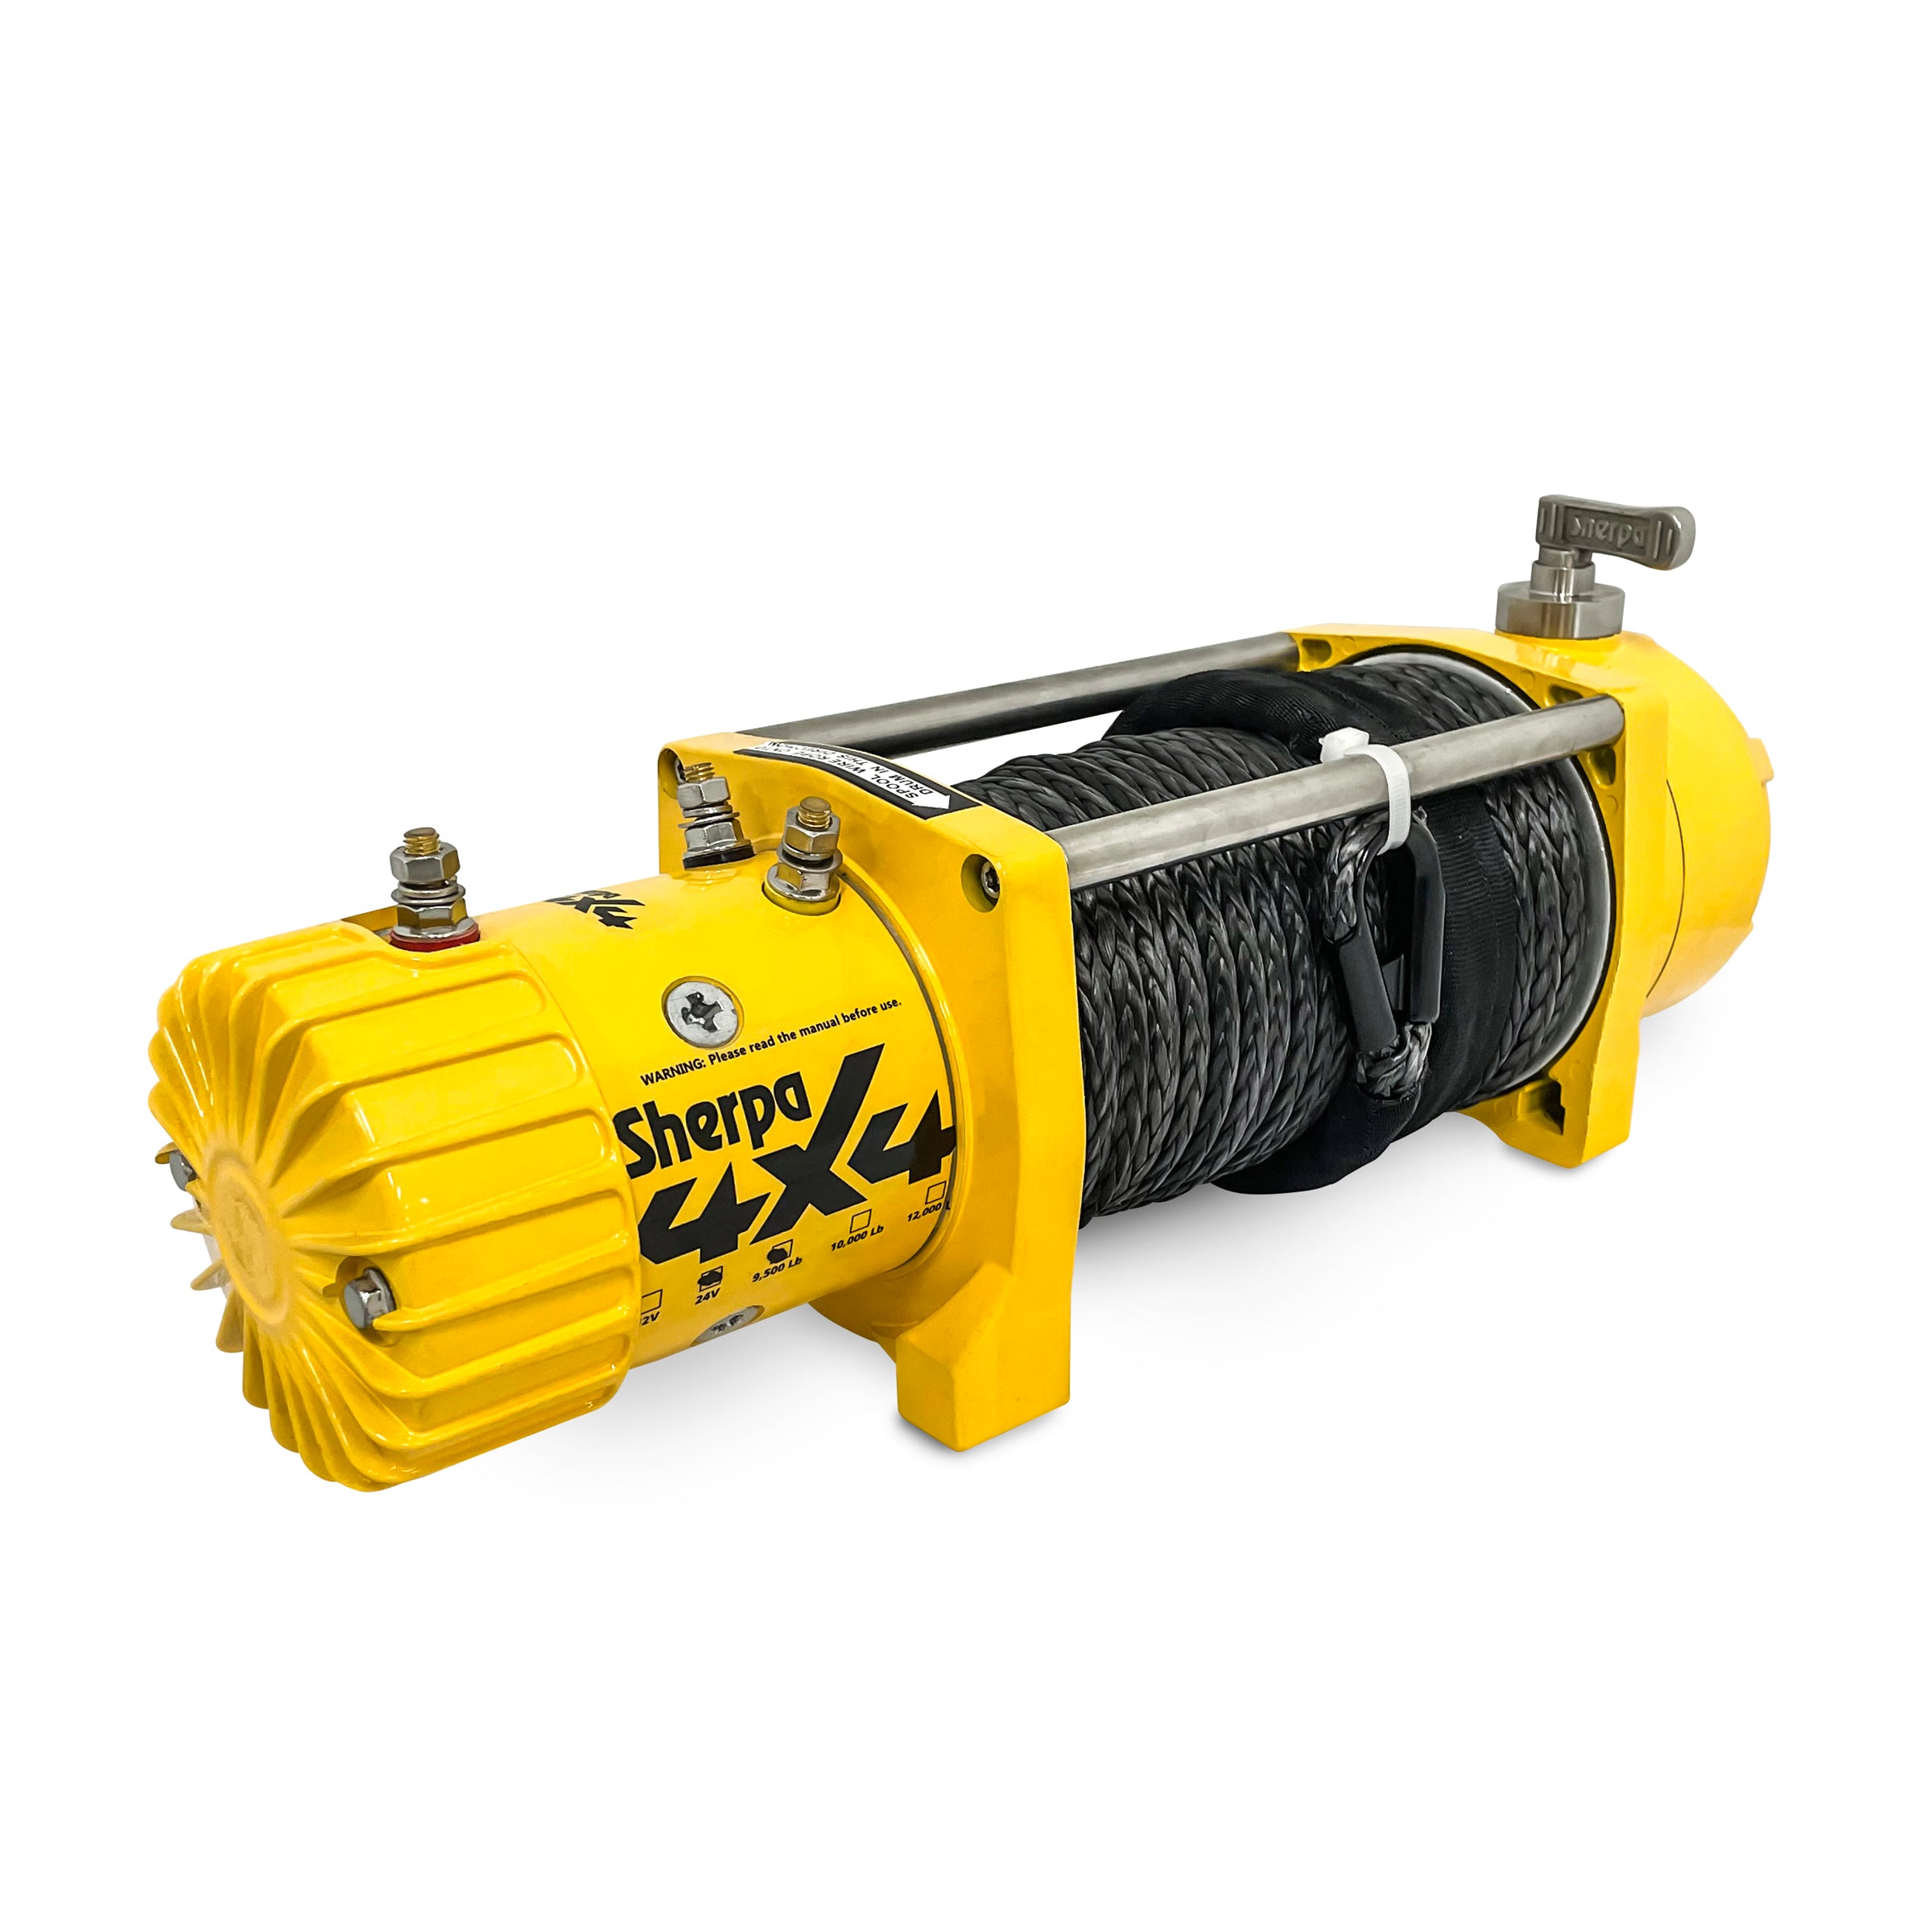 Sherpa 4x4 4wd winch The Mustang, 9,500lb 28m Rope winch